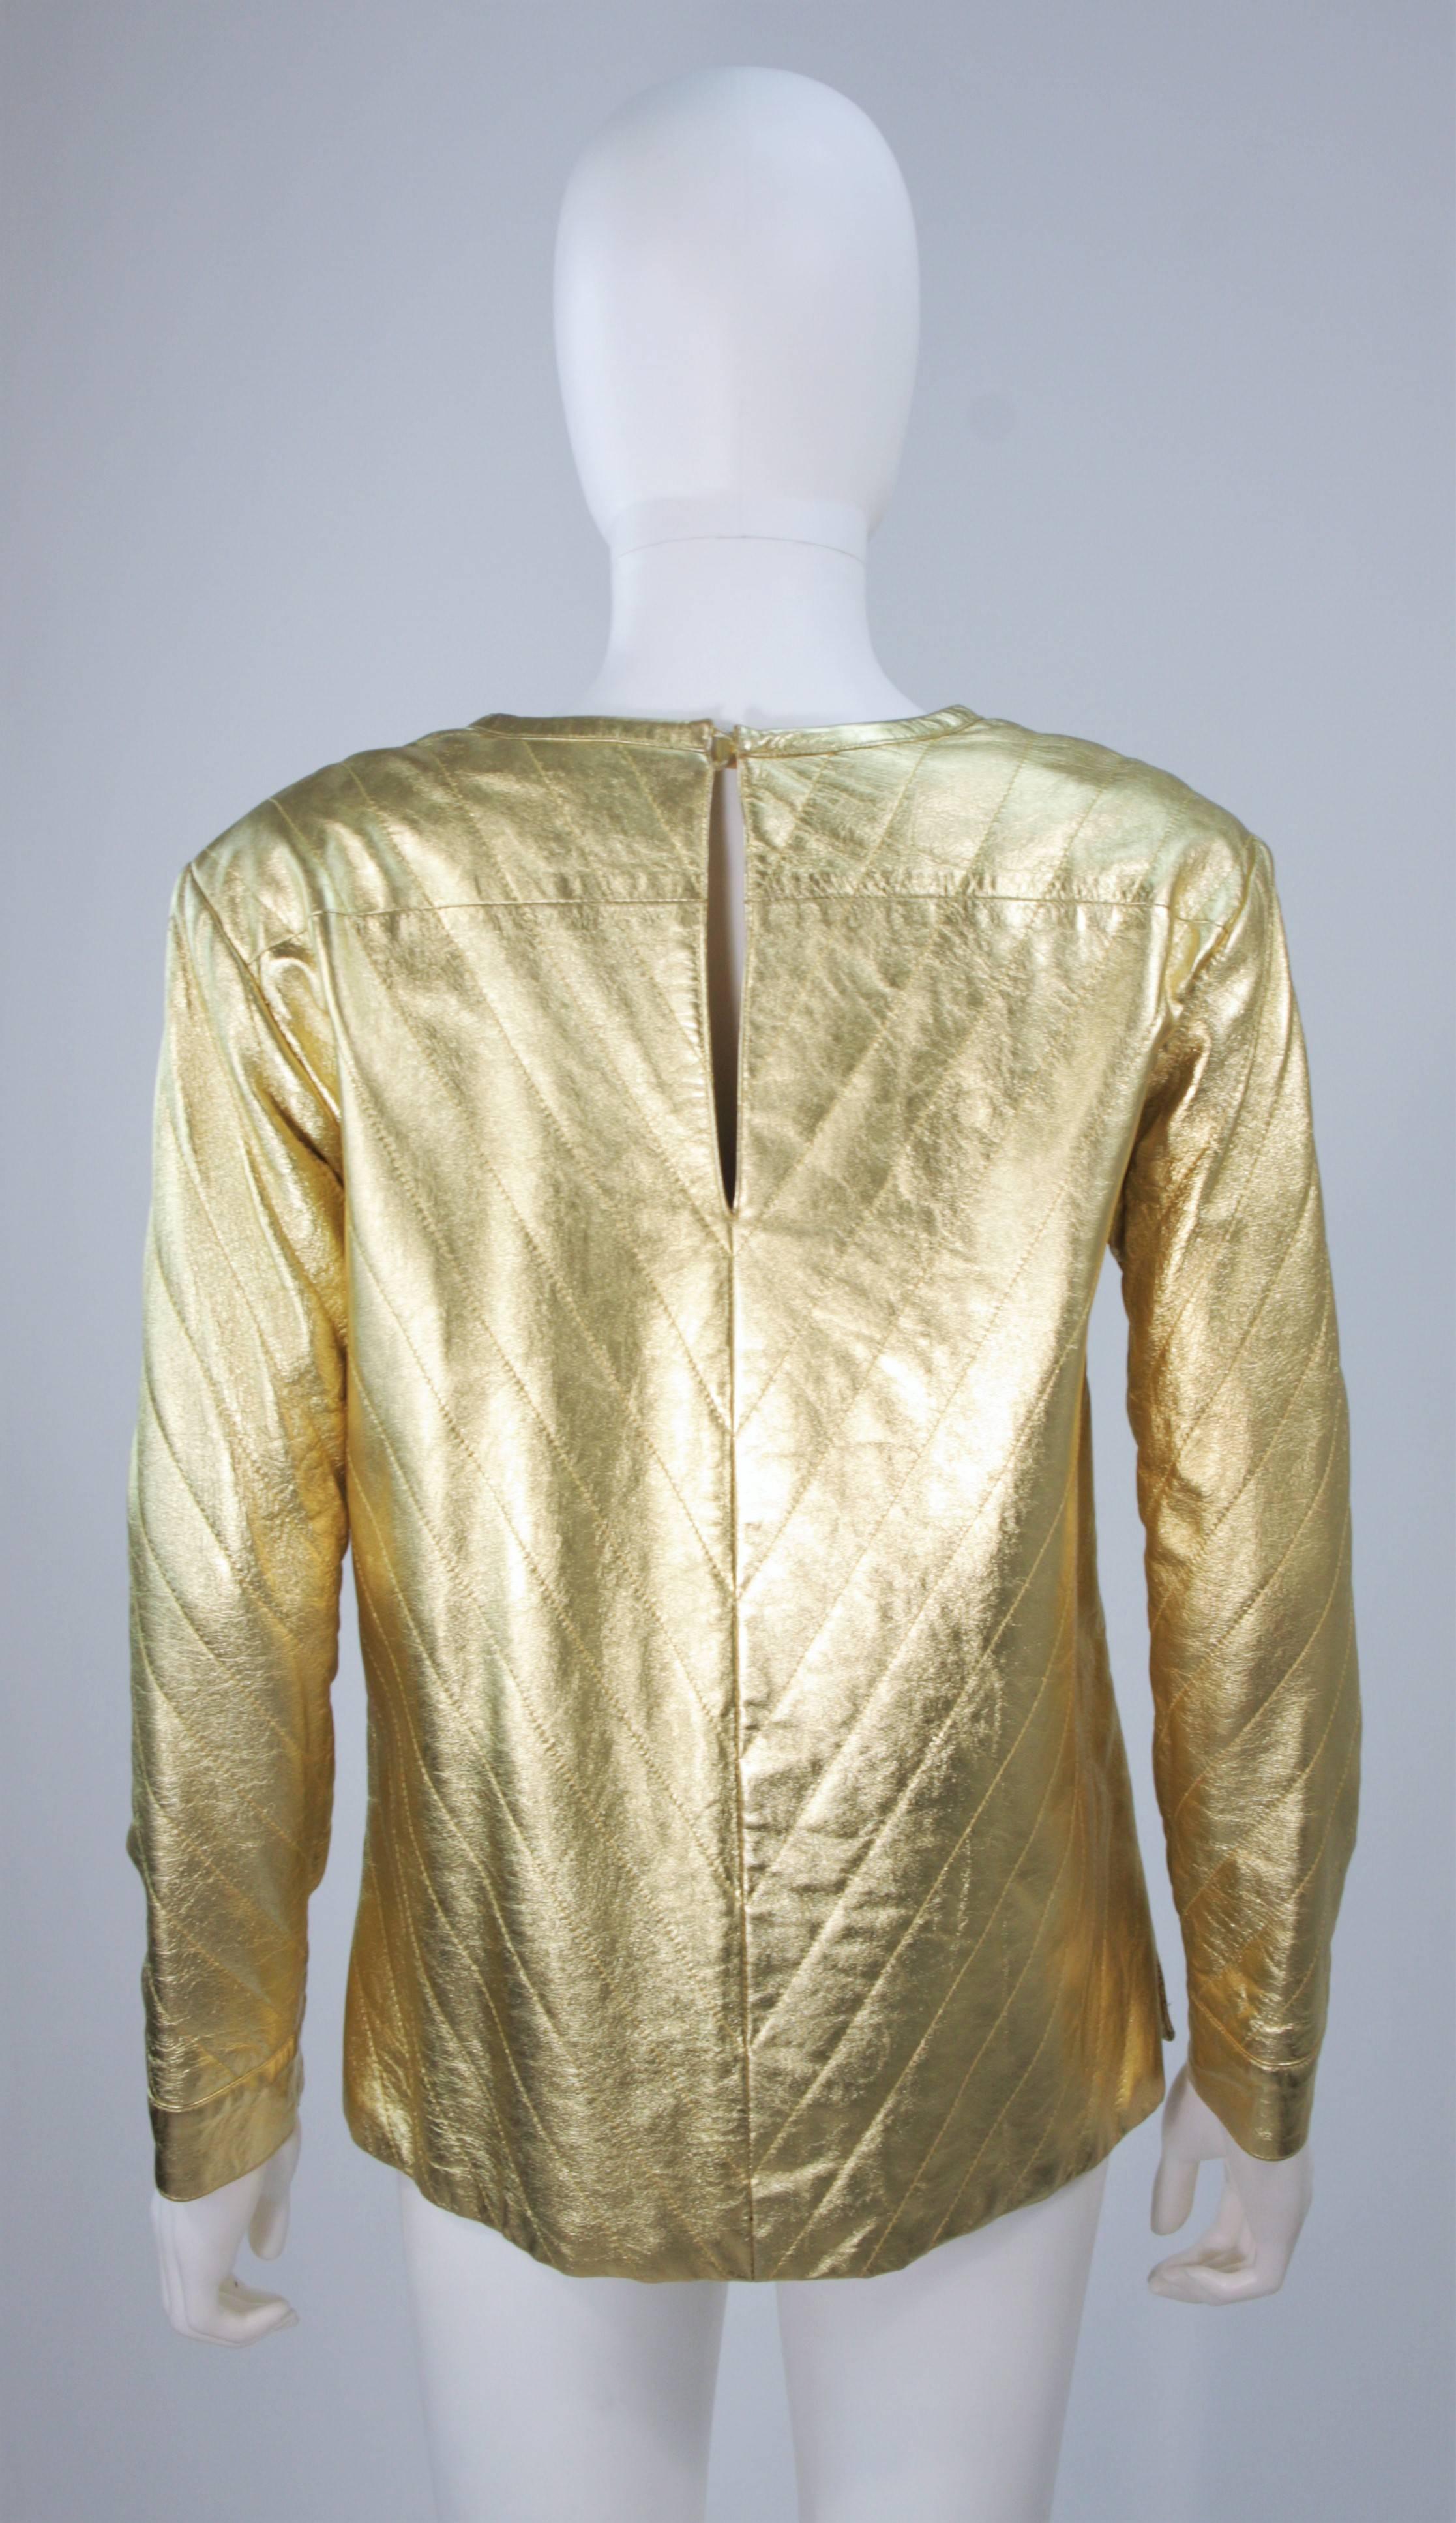 YVES SAINT LAURENT Gold Metallic Quilted Leather Top Size 38 For Sale 2